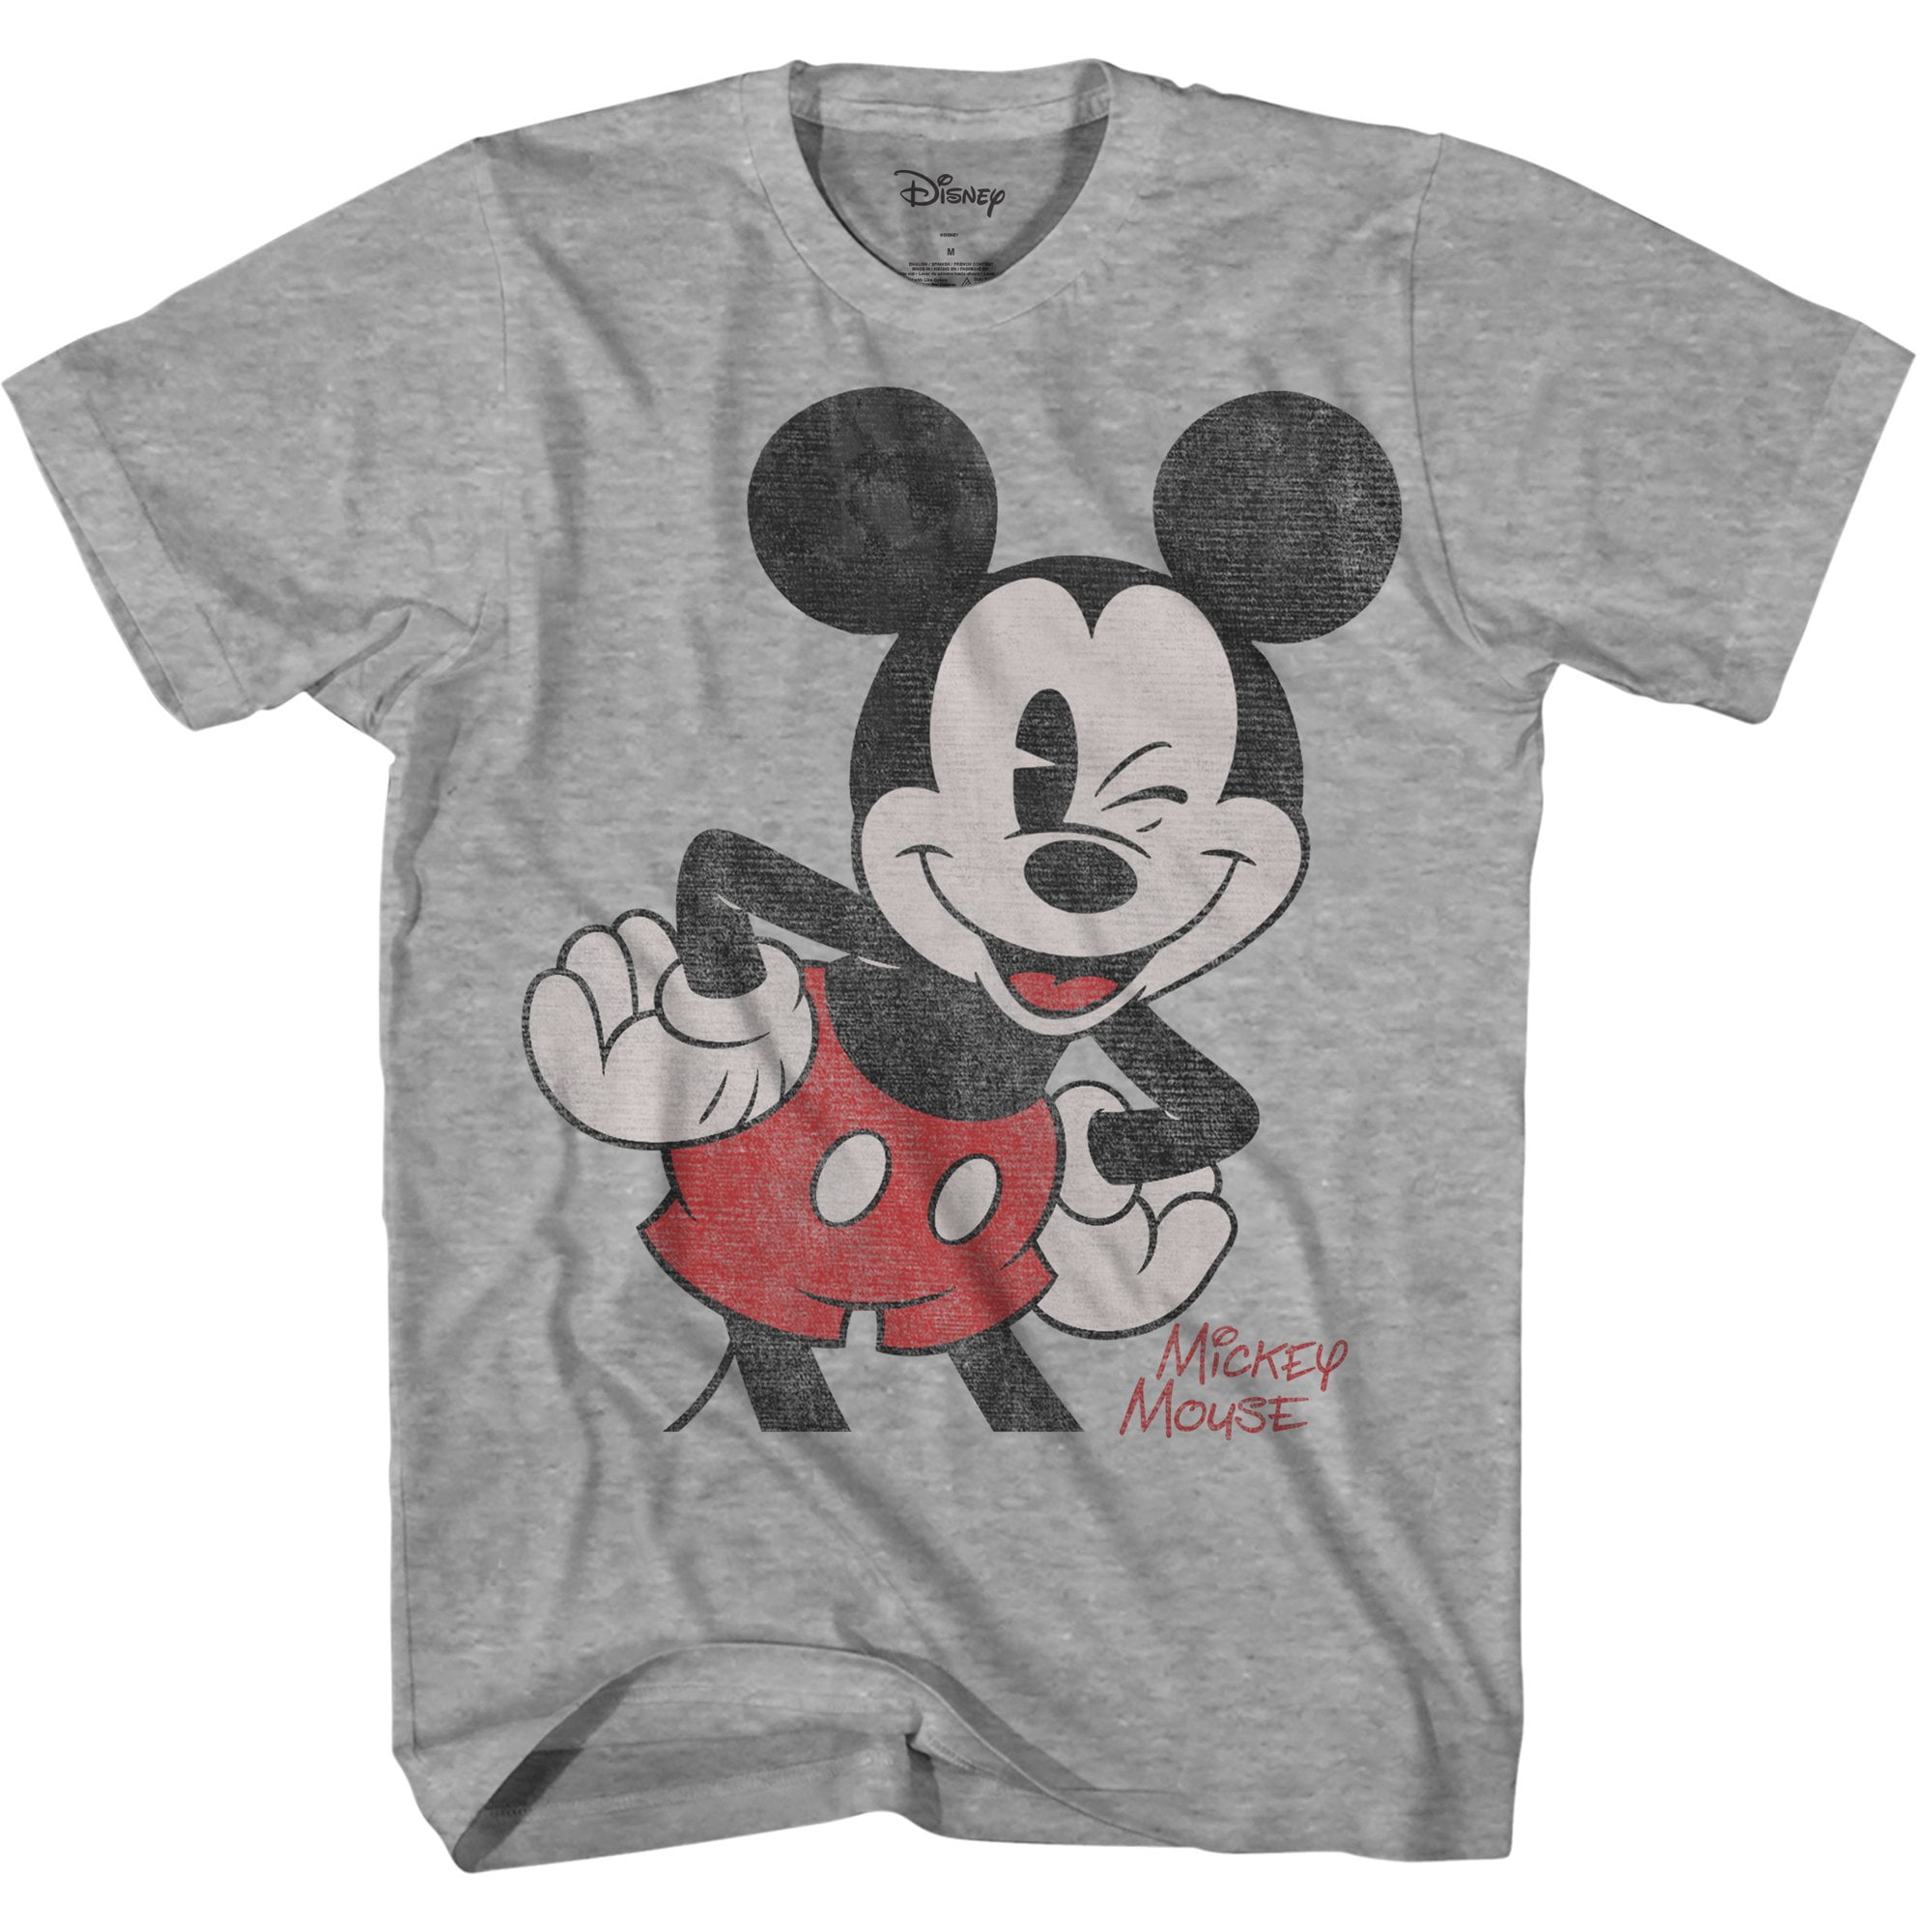 Disney Mickey Mouse Shirt Men's Distressed Graphic Big and Tall T-Shirt 